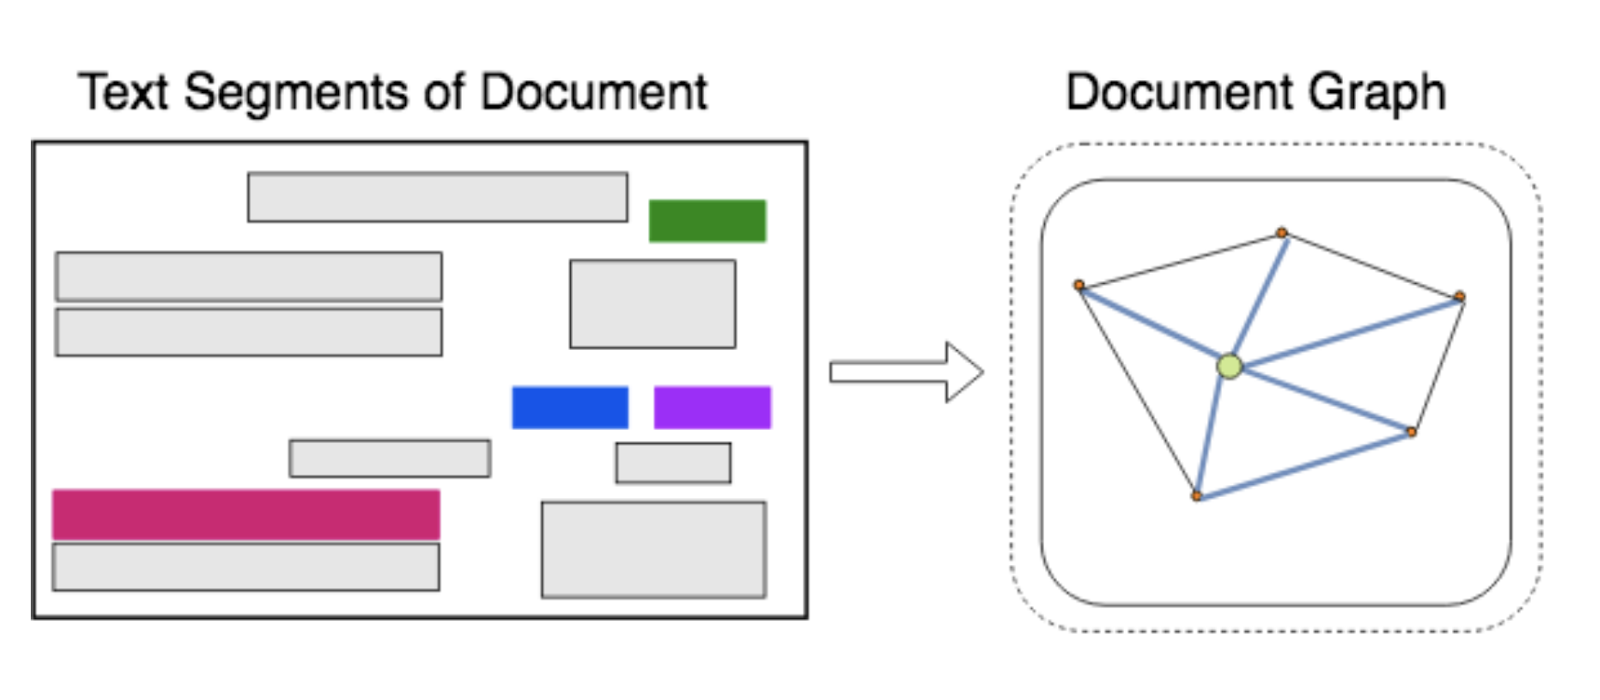 ID Card Digitization and Information Extraction using Deep Learning - A Review